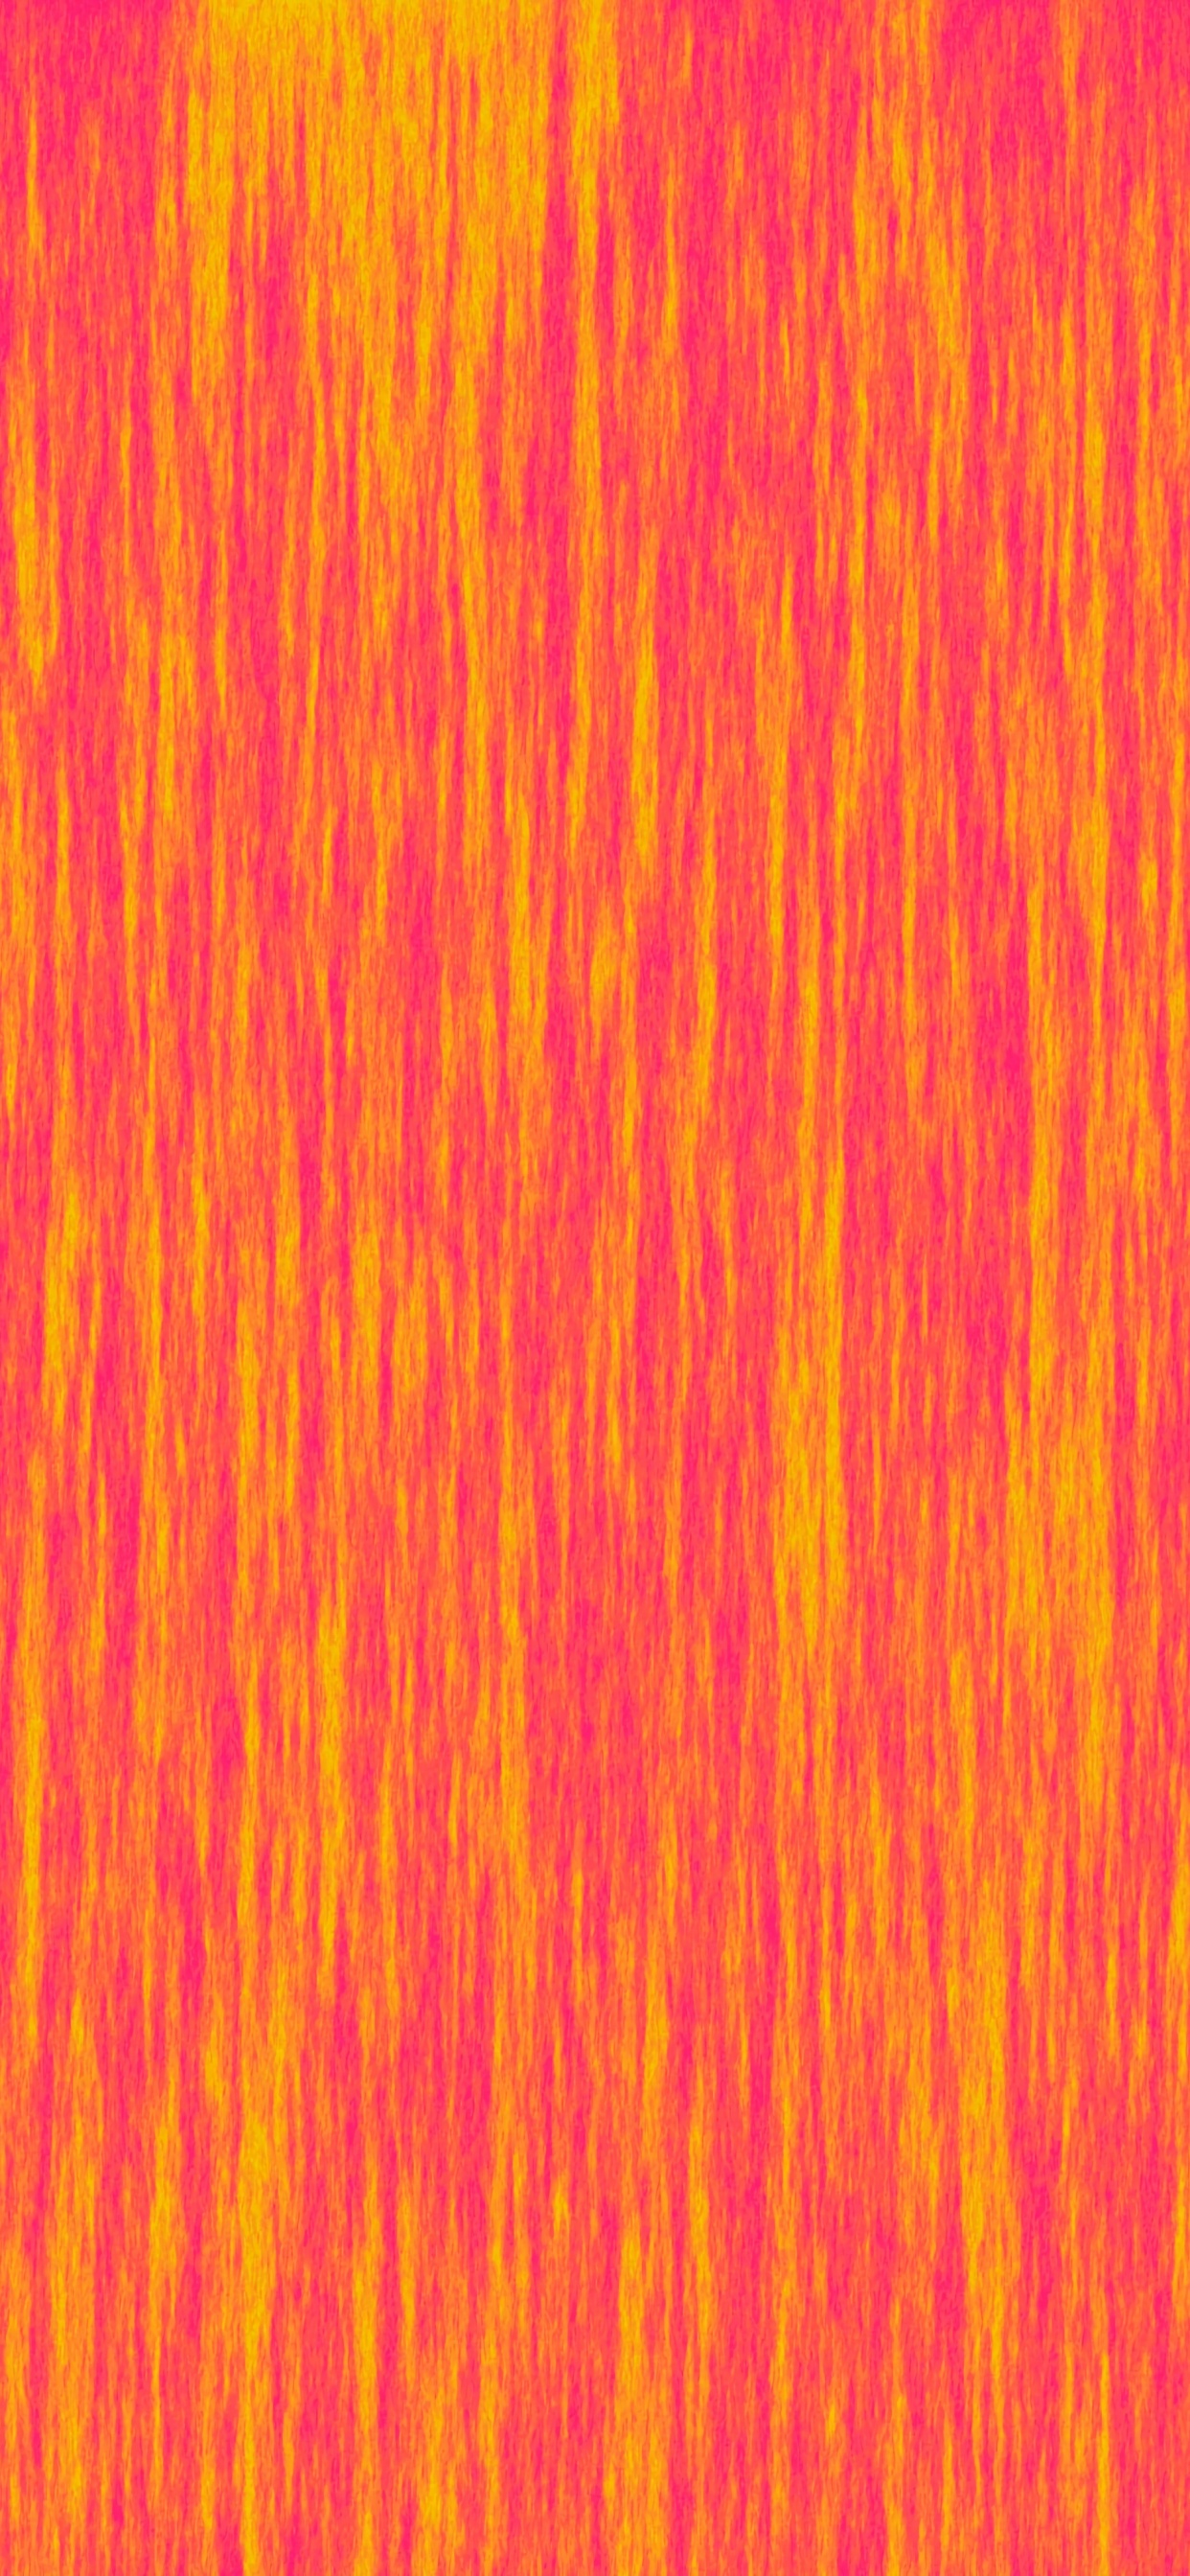 Orange and Yellow Striped Textile. Wallpaper in 1242x2688 Resolution